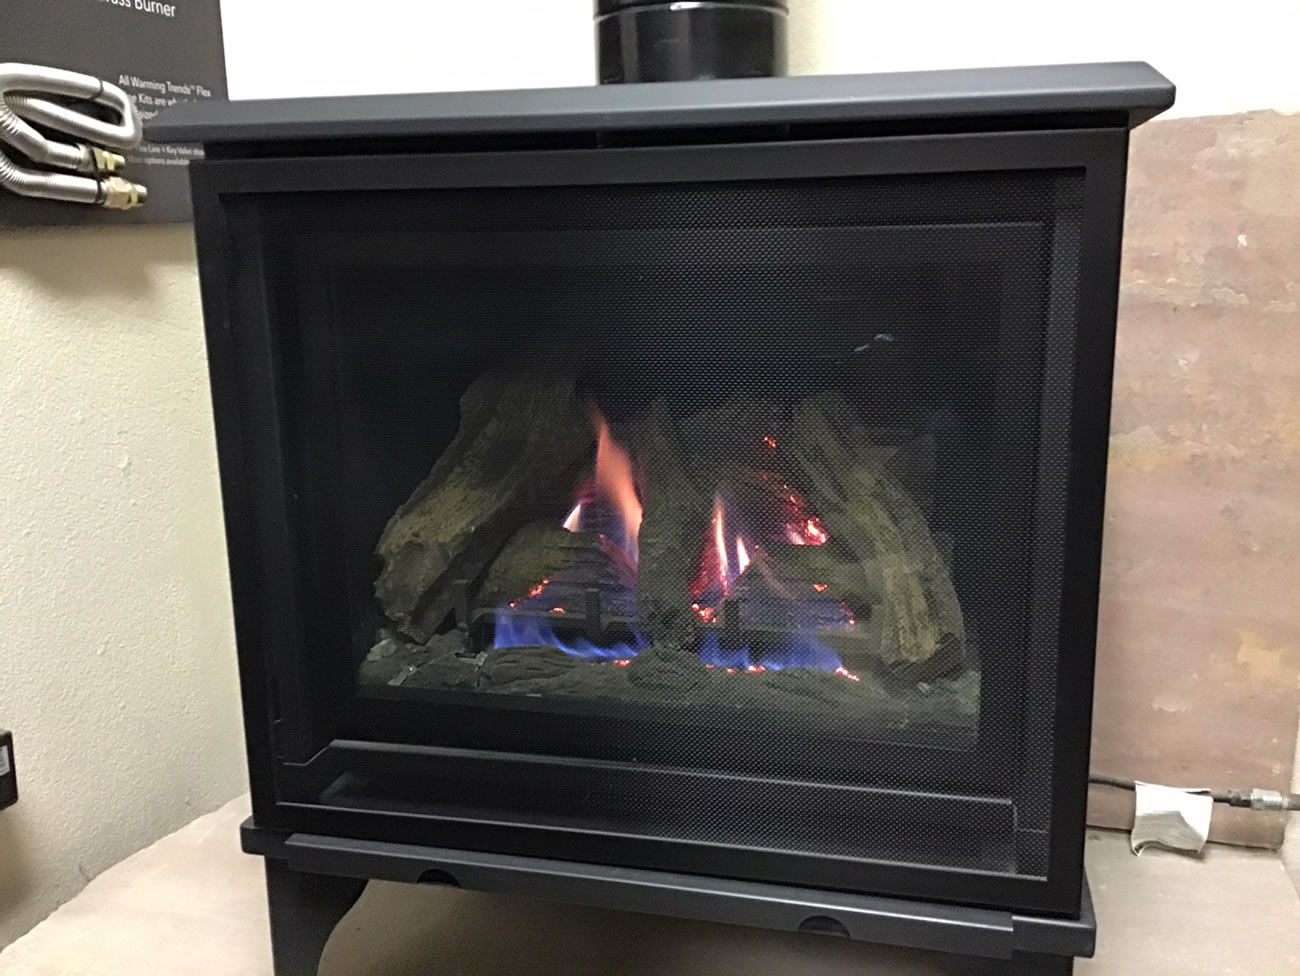 Flagstaff Gas Fireplaces, Flagstaff Gas Stoves, Flagstaff Gas Grills Sales and Installs